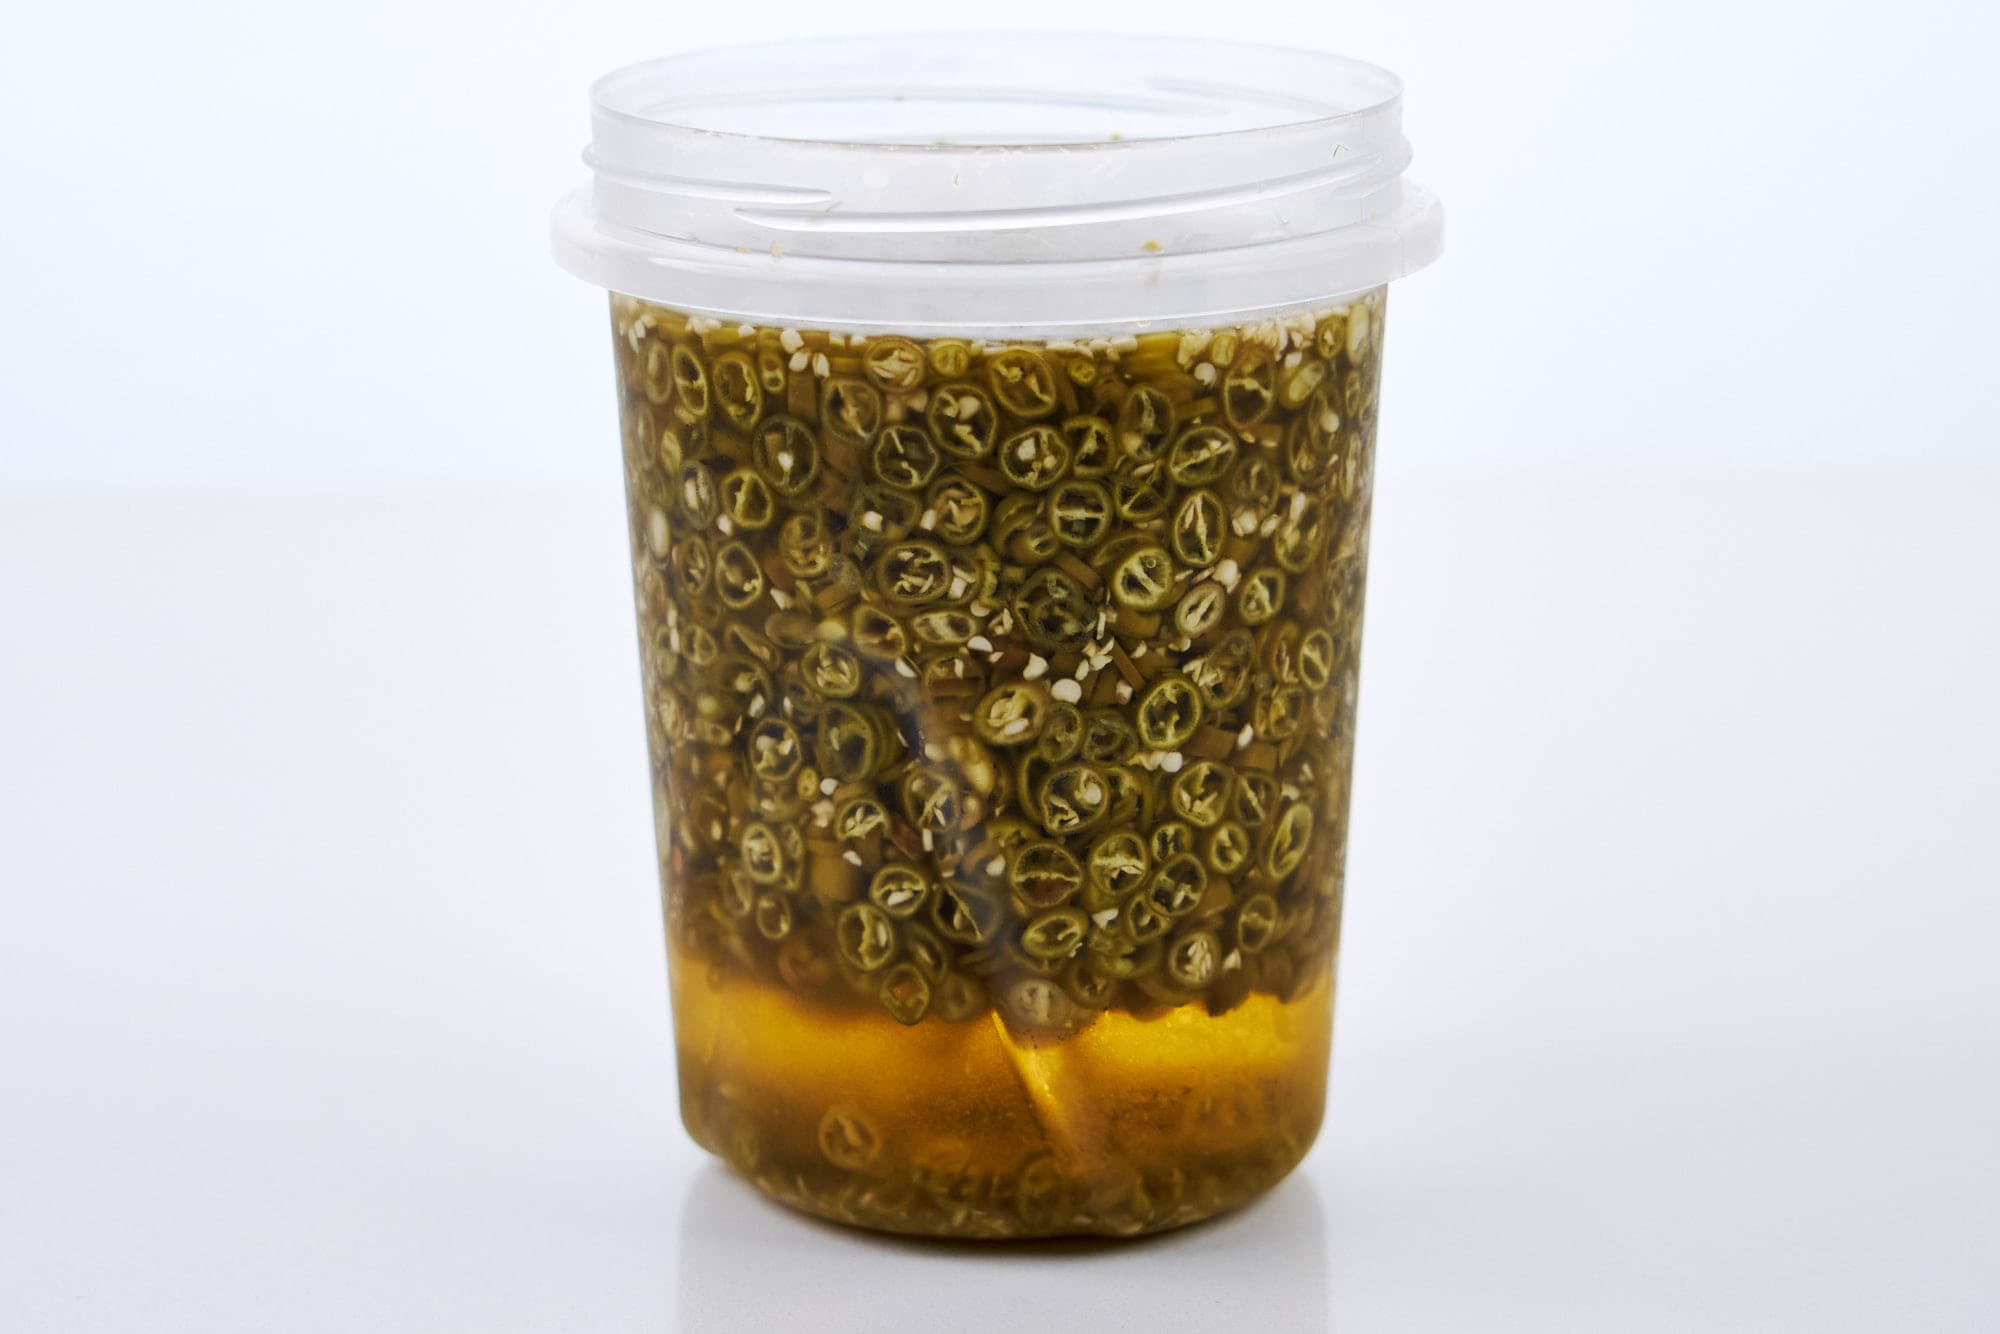 Container of pickled Japanese togarashi pepper.